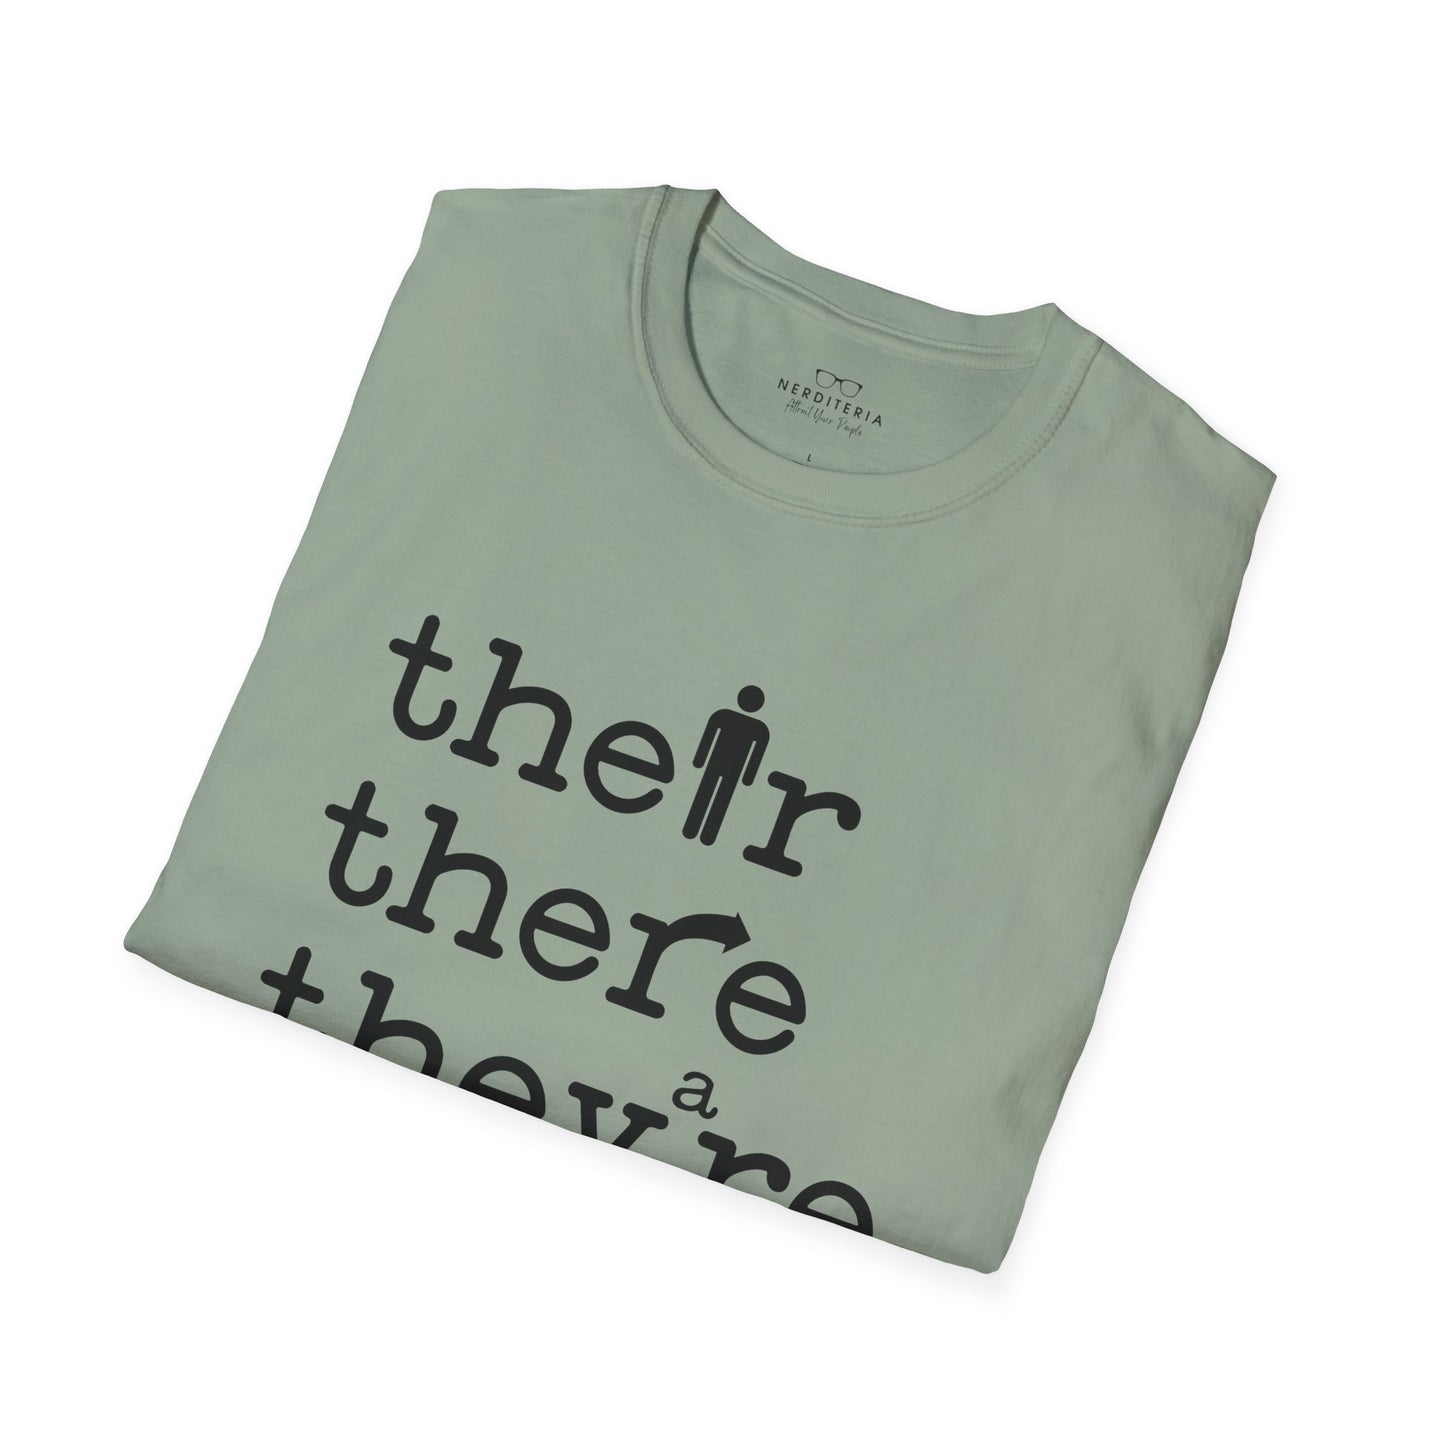 Their, There, They're Grammar T-Shirt - Nerd Stuff